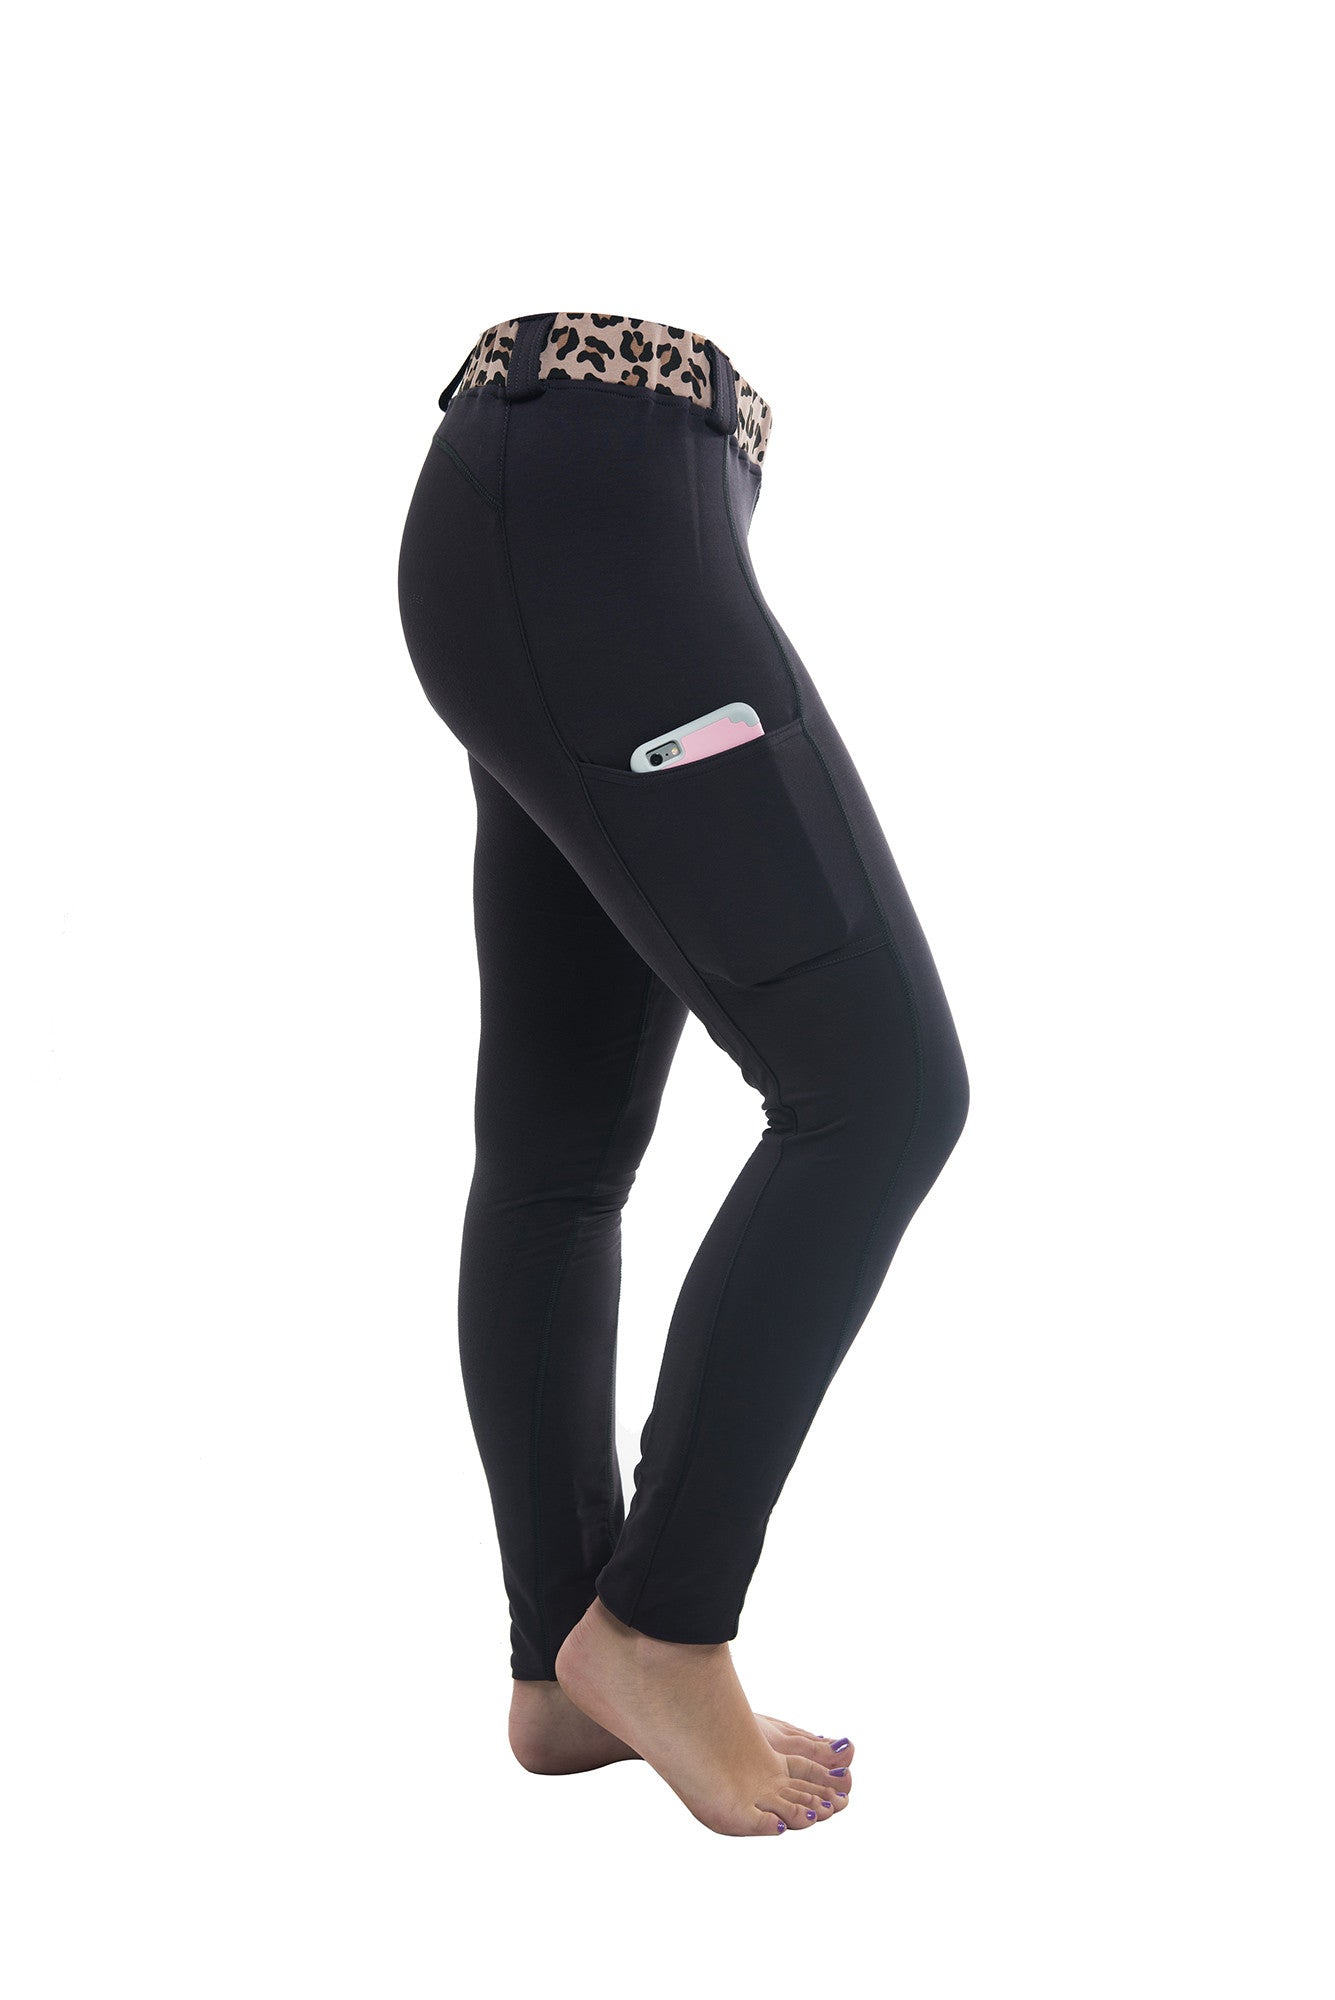 Buckwild Riding Tights with Side Pocket